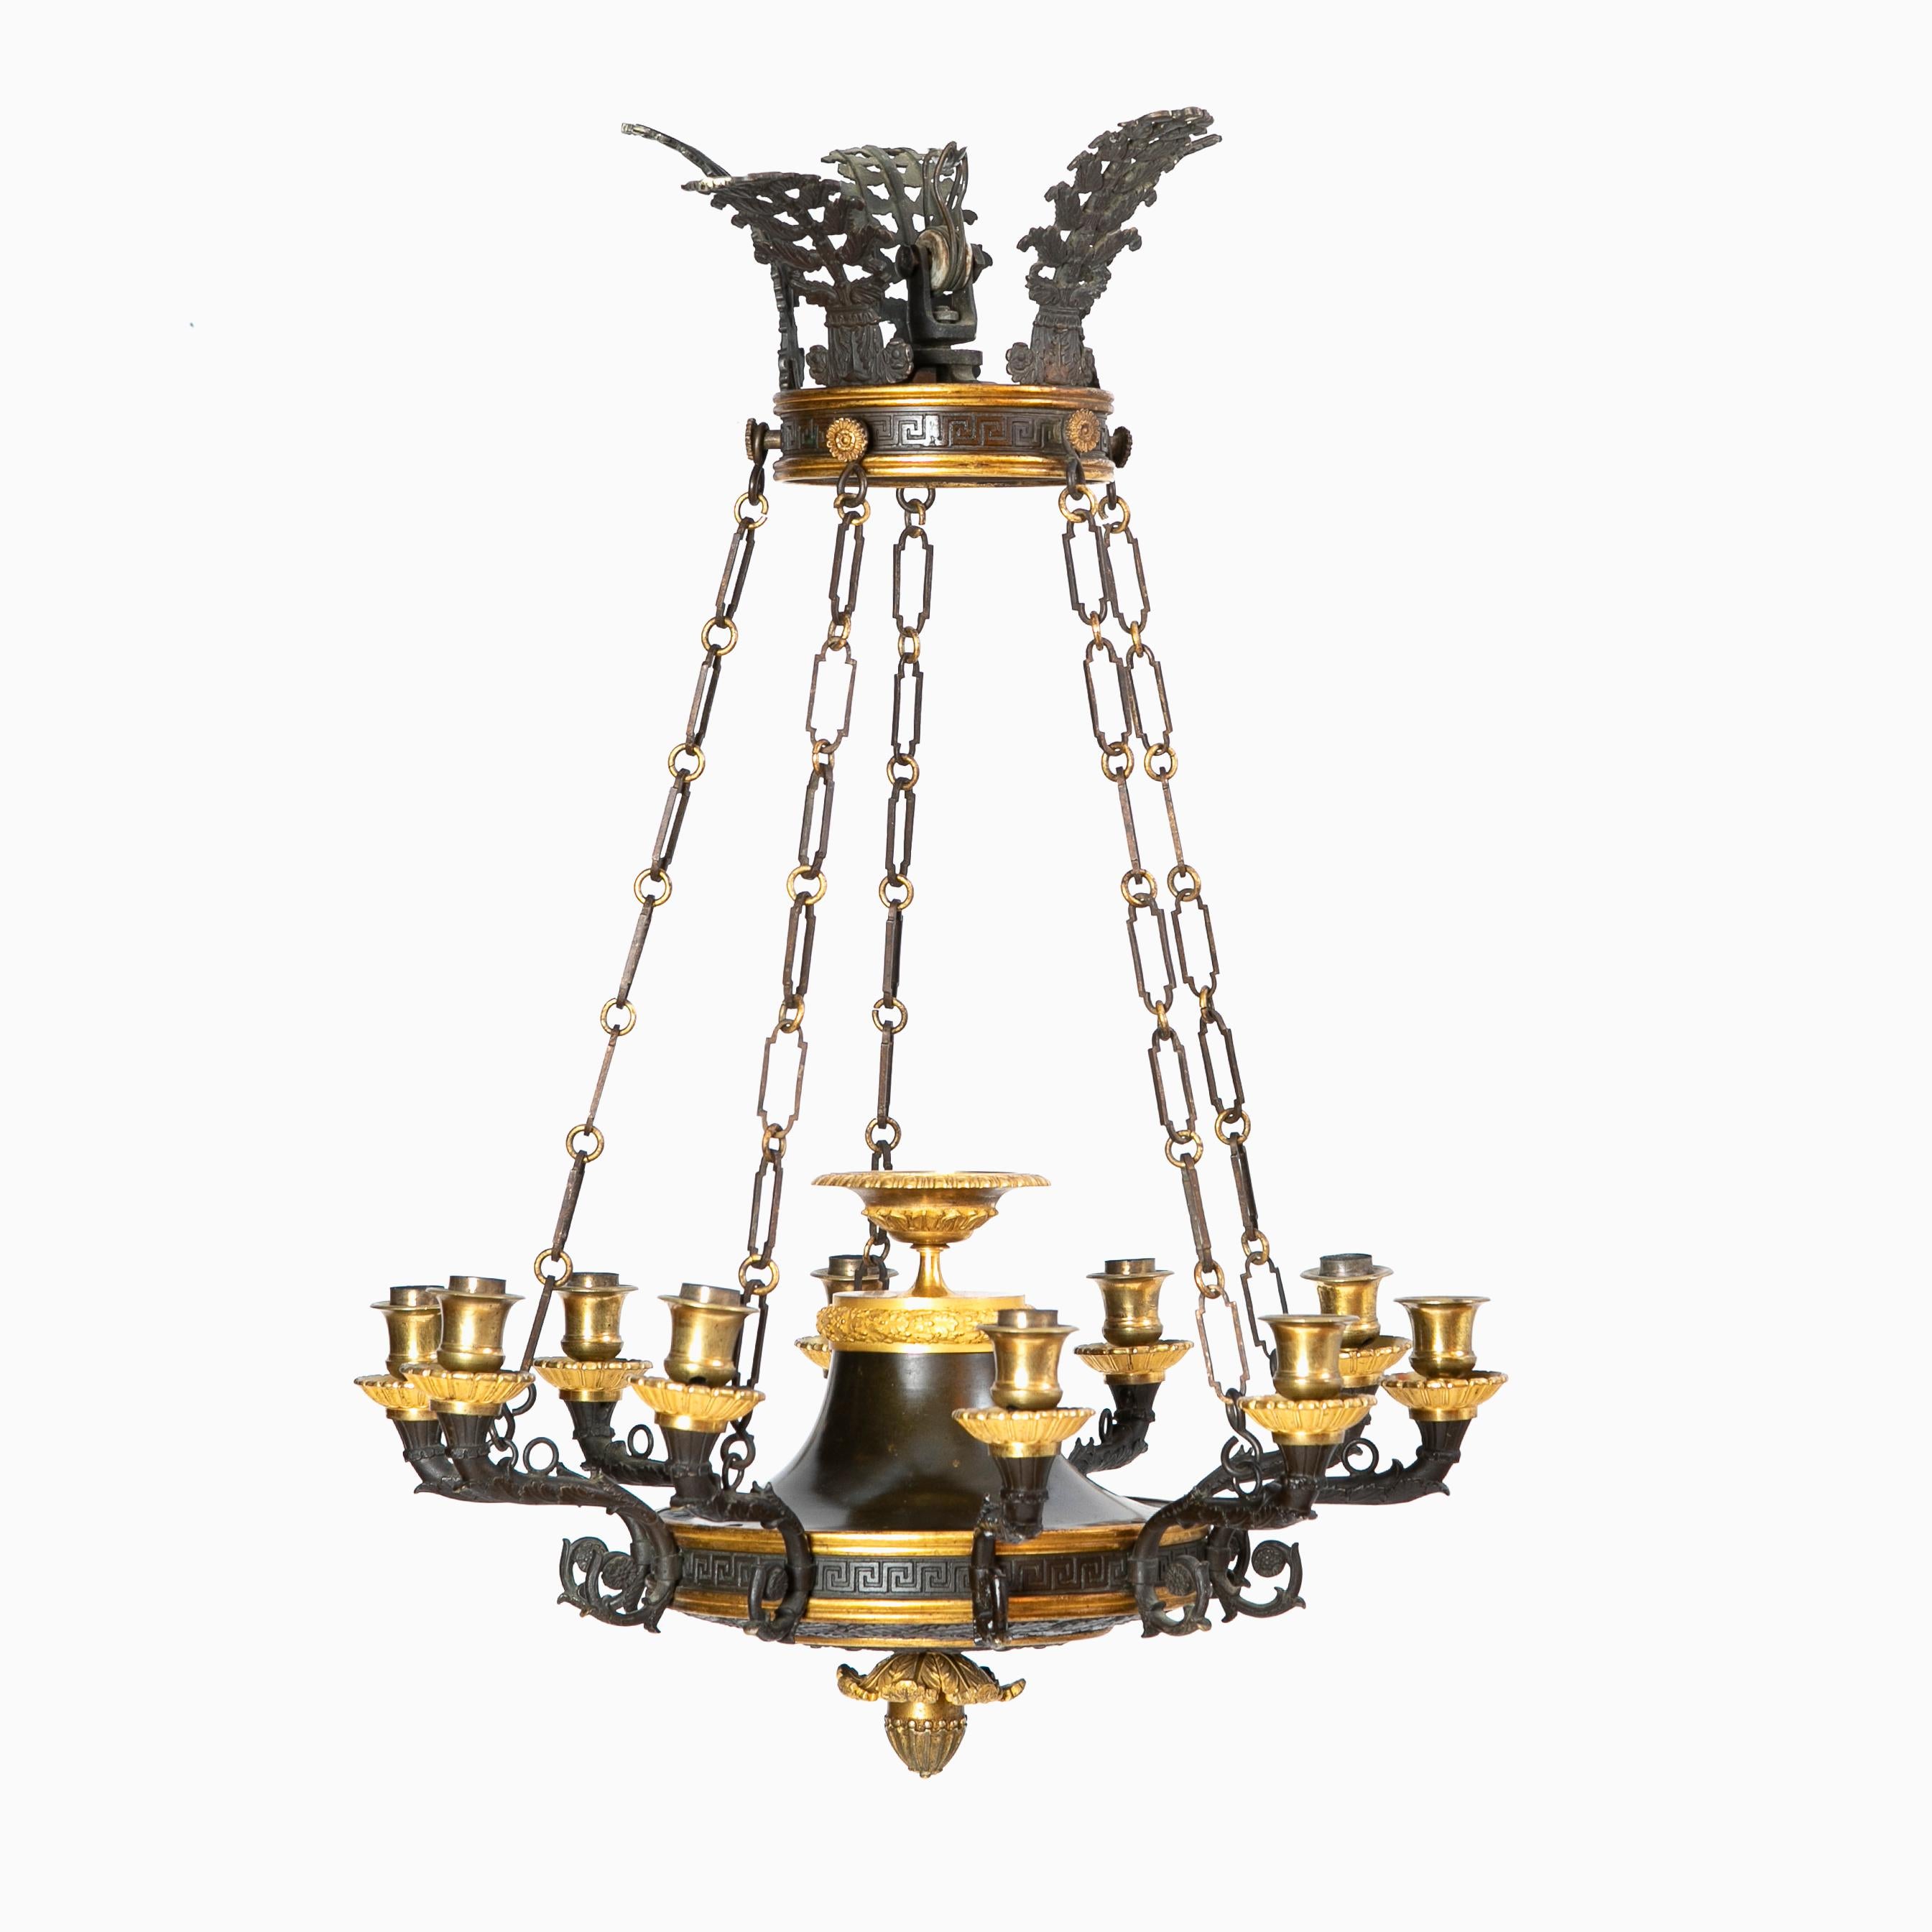 A French 10 arm Charles X chandelier in patinated bronze and ormolu.
Rich in details with a coronet adorned with à la grecque décor and a black polished leaf crown. Original chains supporting a circular bowl form ten light fixture, each adorned with